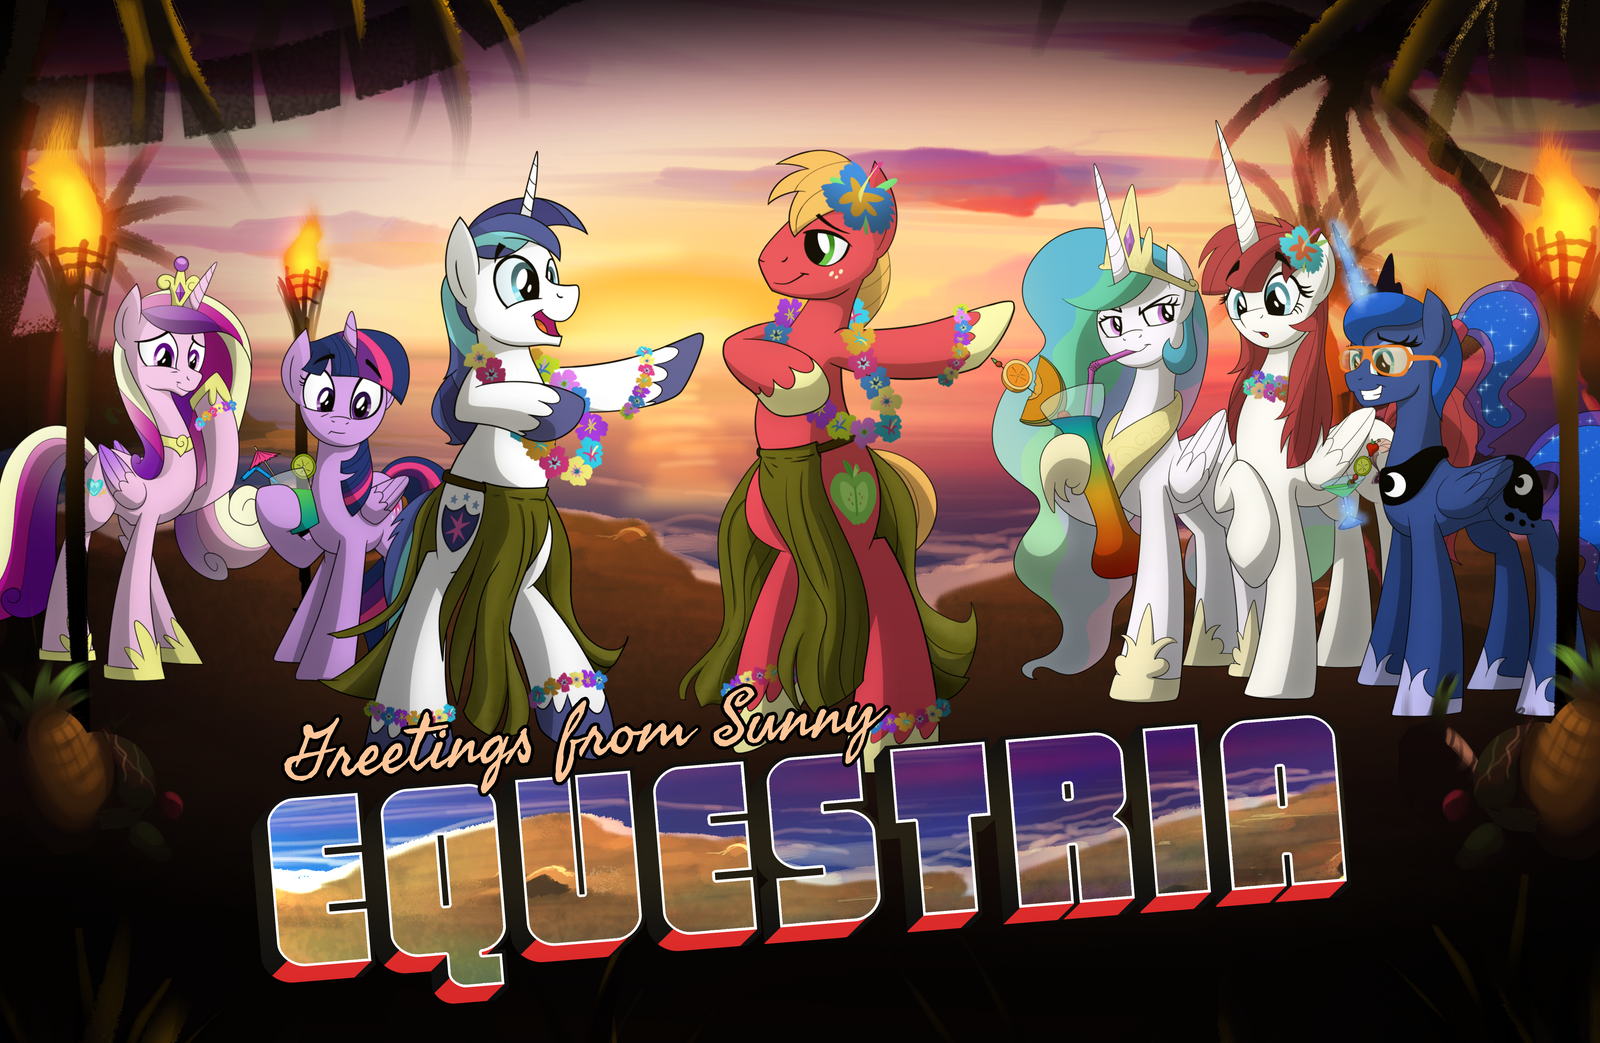 [Obrázek: greetings_from_sunny_equestria_by_drawpo...a9d8nv.png]